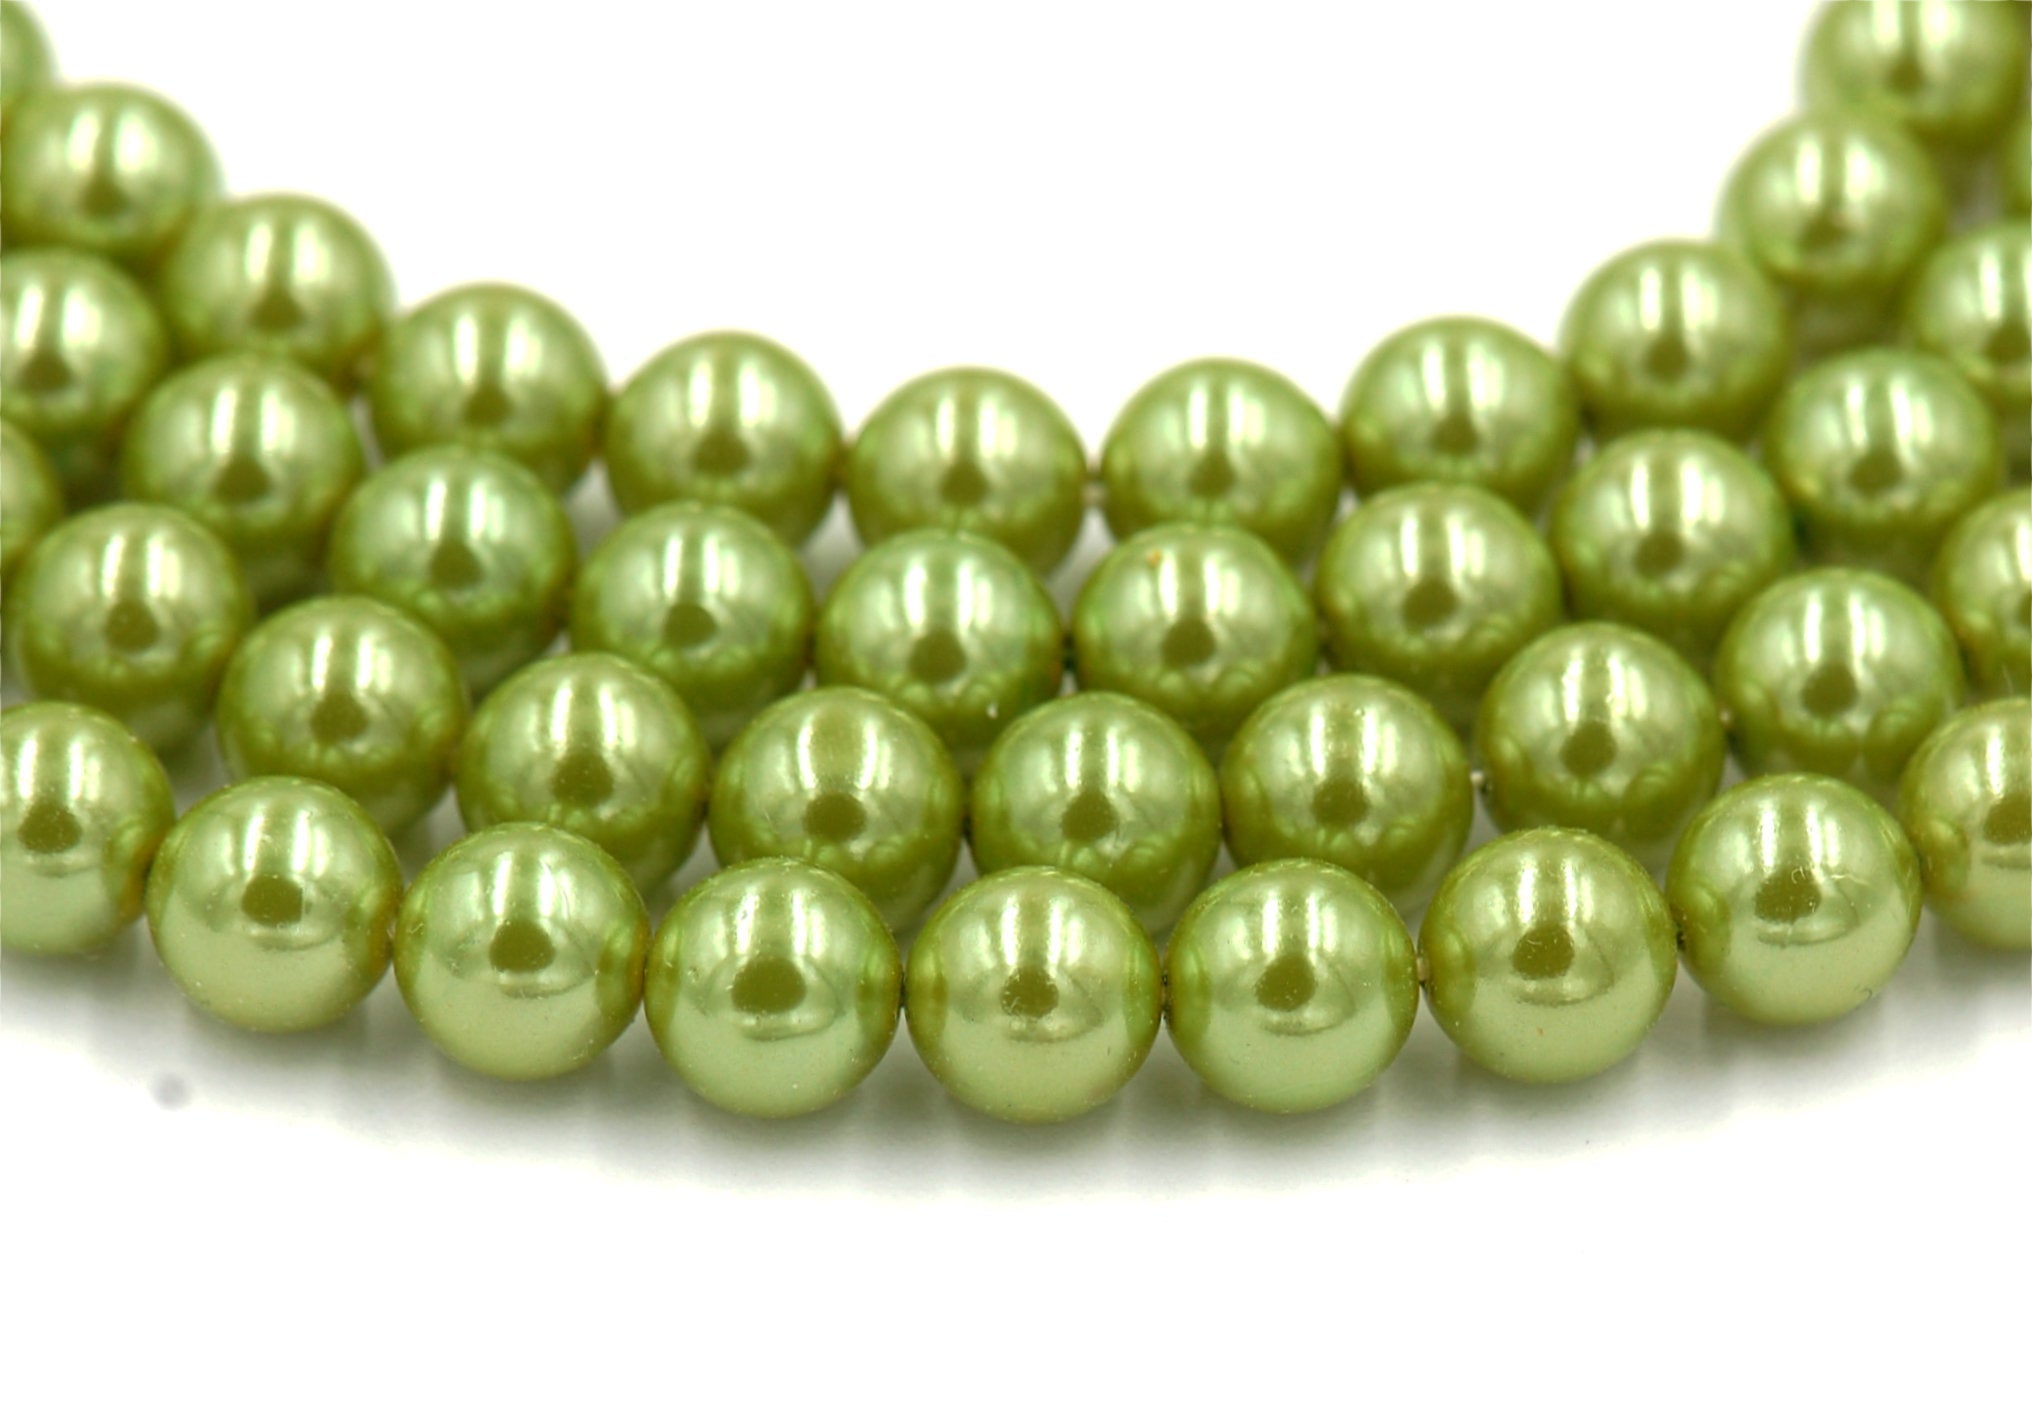 Czech Glass Pearl Coated Herb Green Beads 4mm, 6mm, 8mm